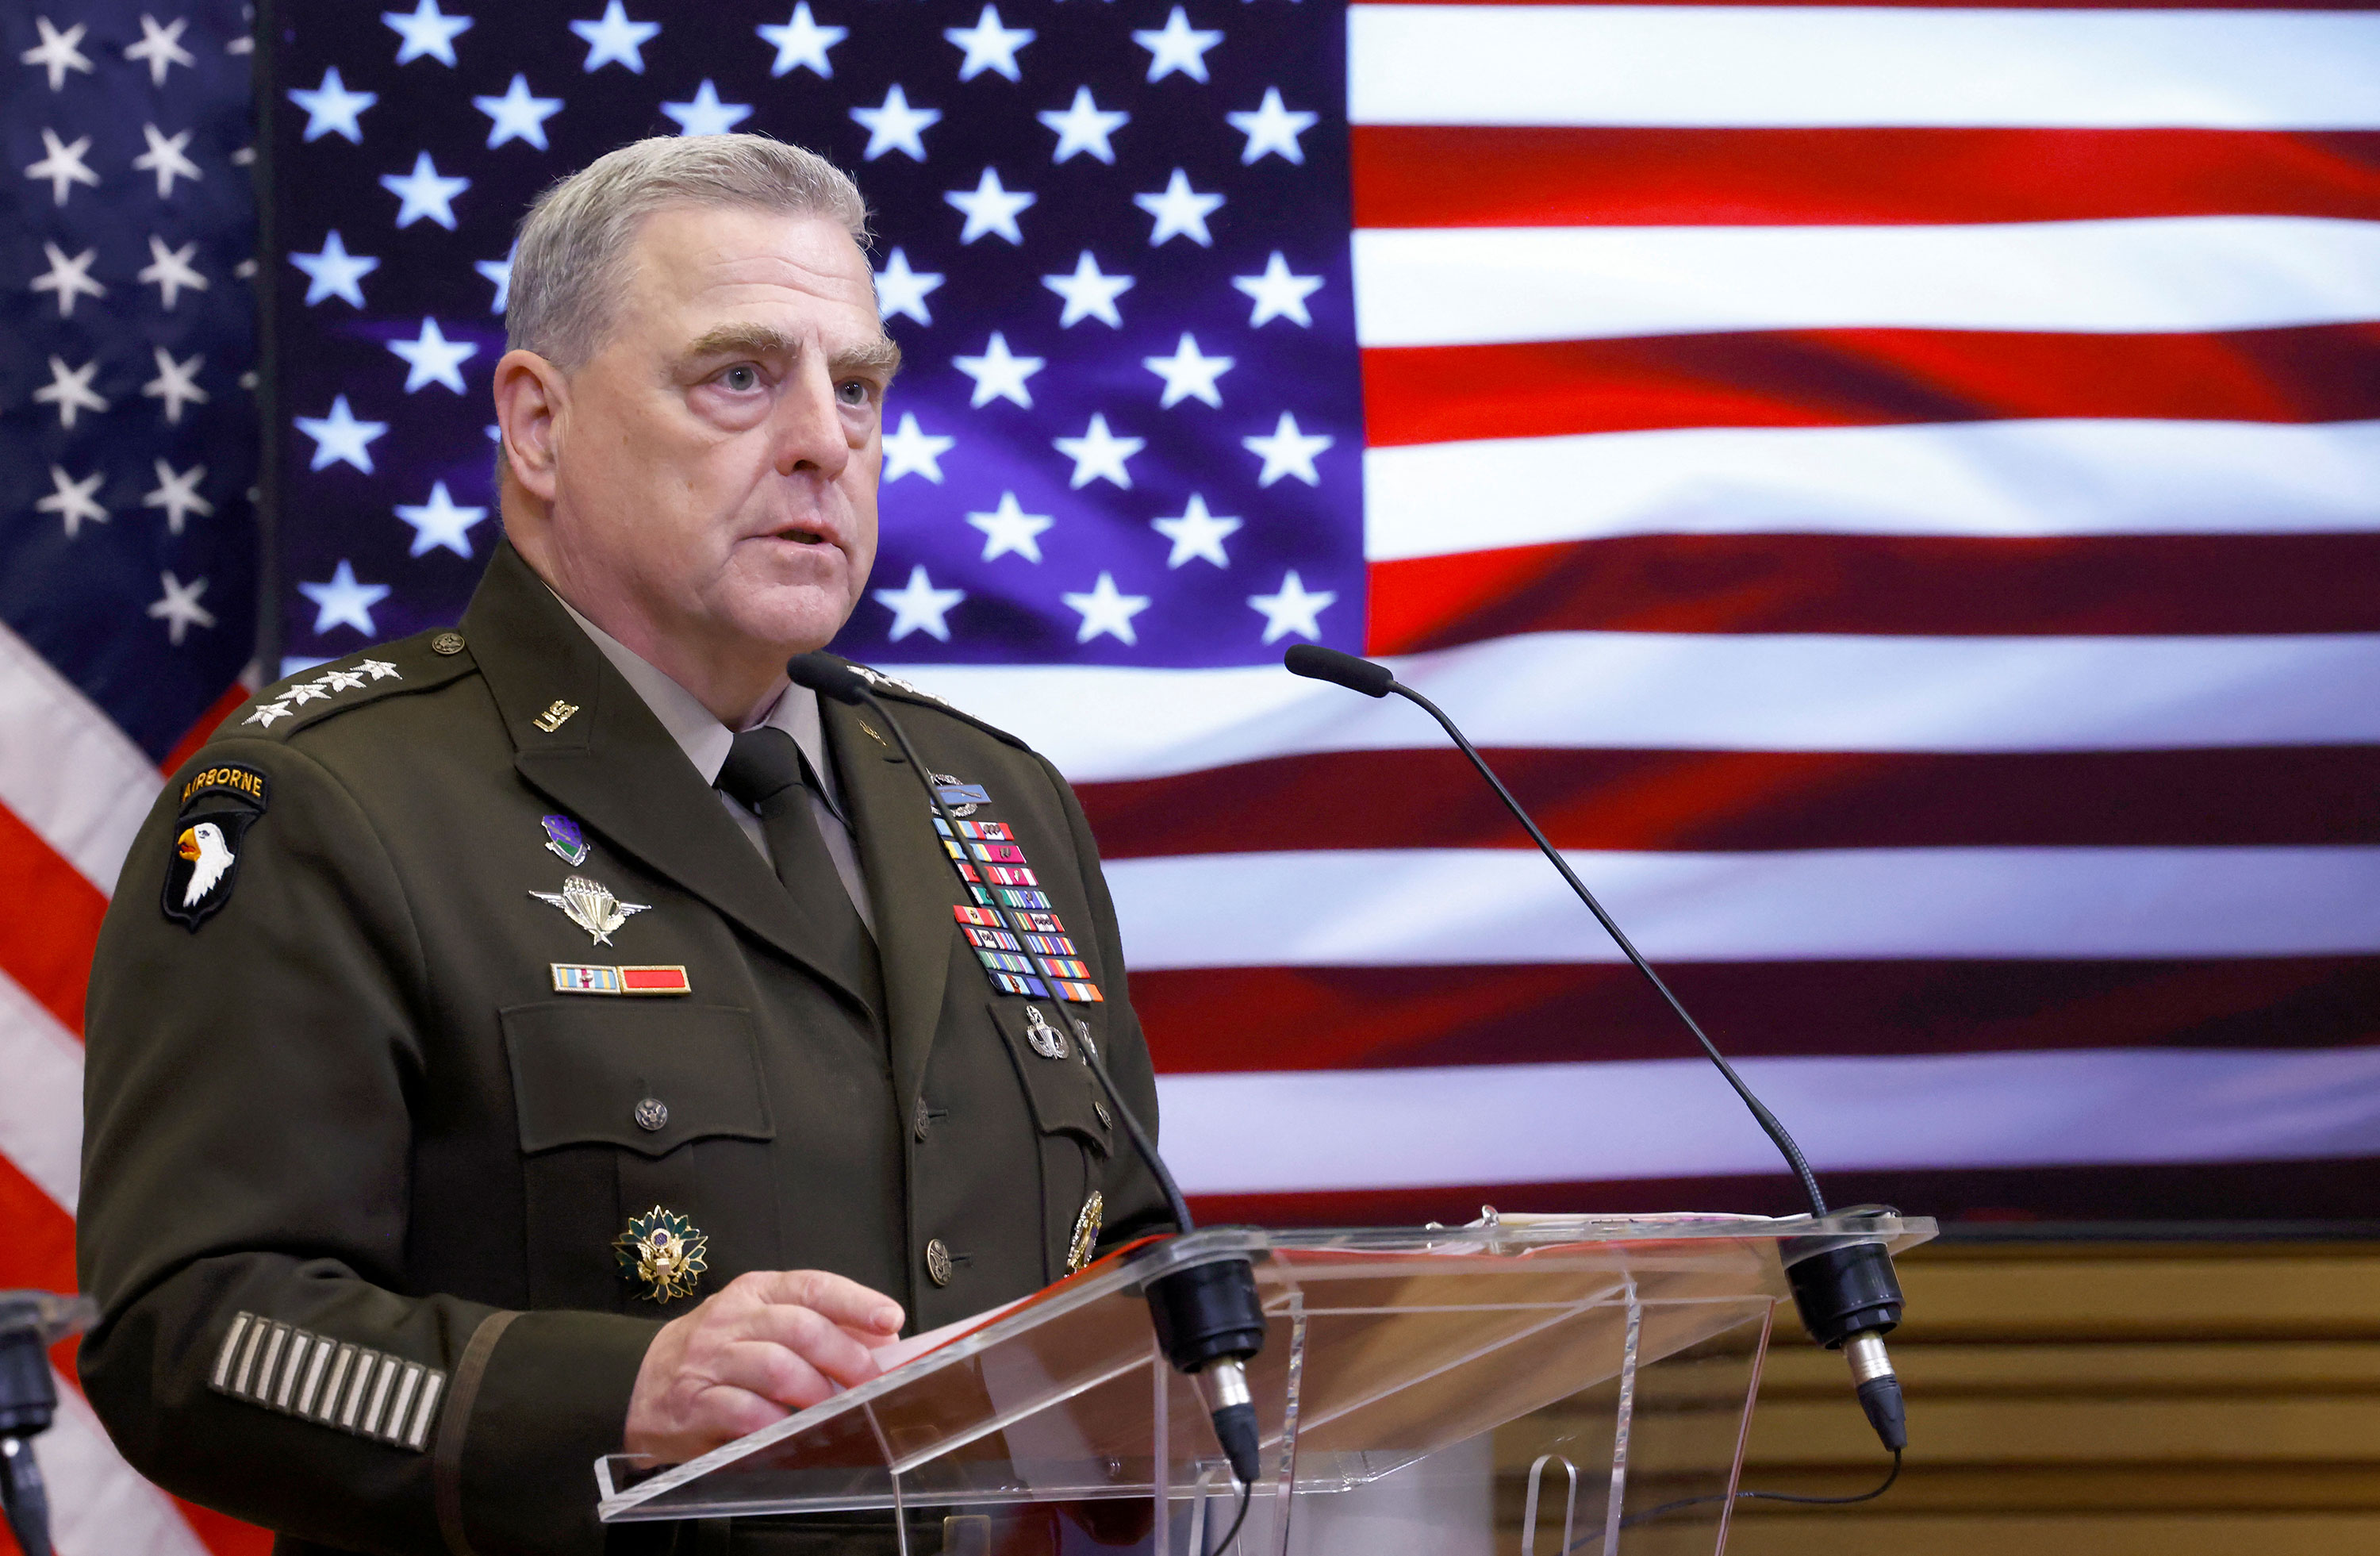 Gen. Mark Milley, chairman of the Joint Chiefs of Staff, speaks during a news conference at the NATO headquarters in Brussels, Belgium, on Wednesday.